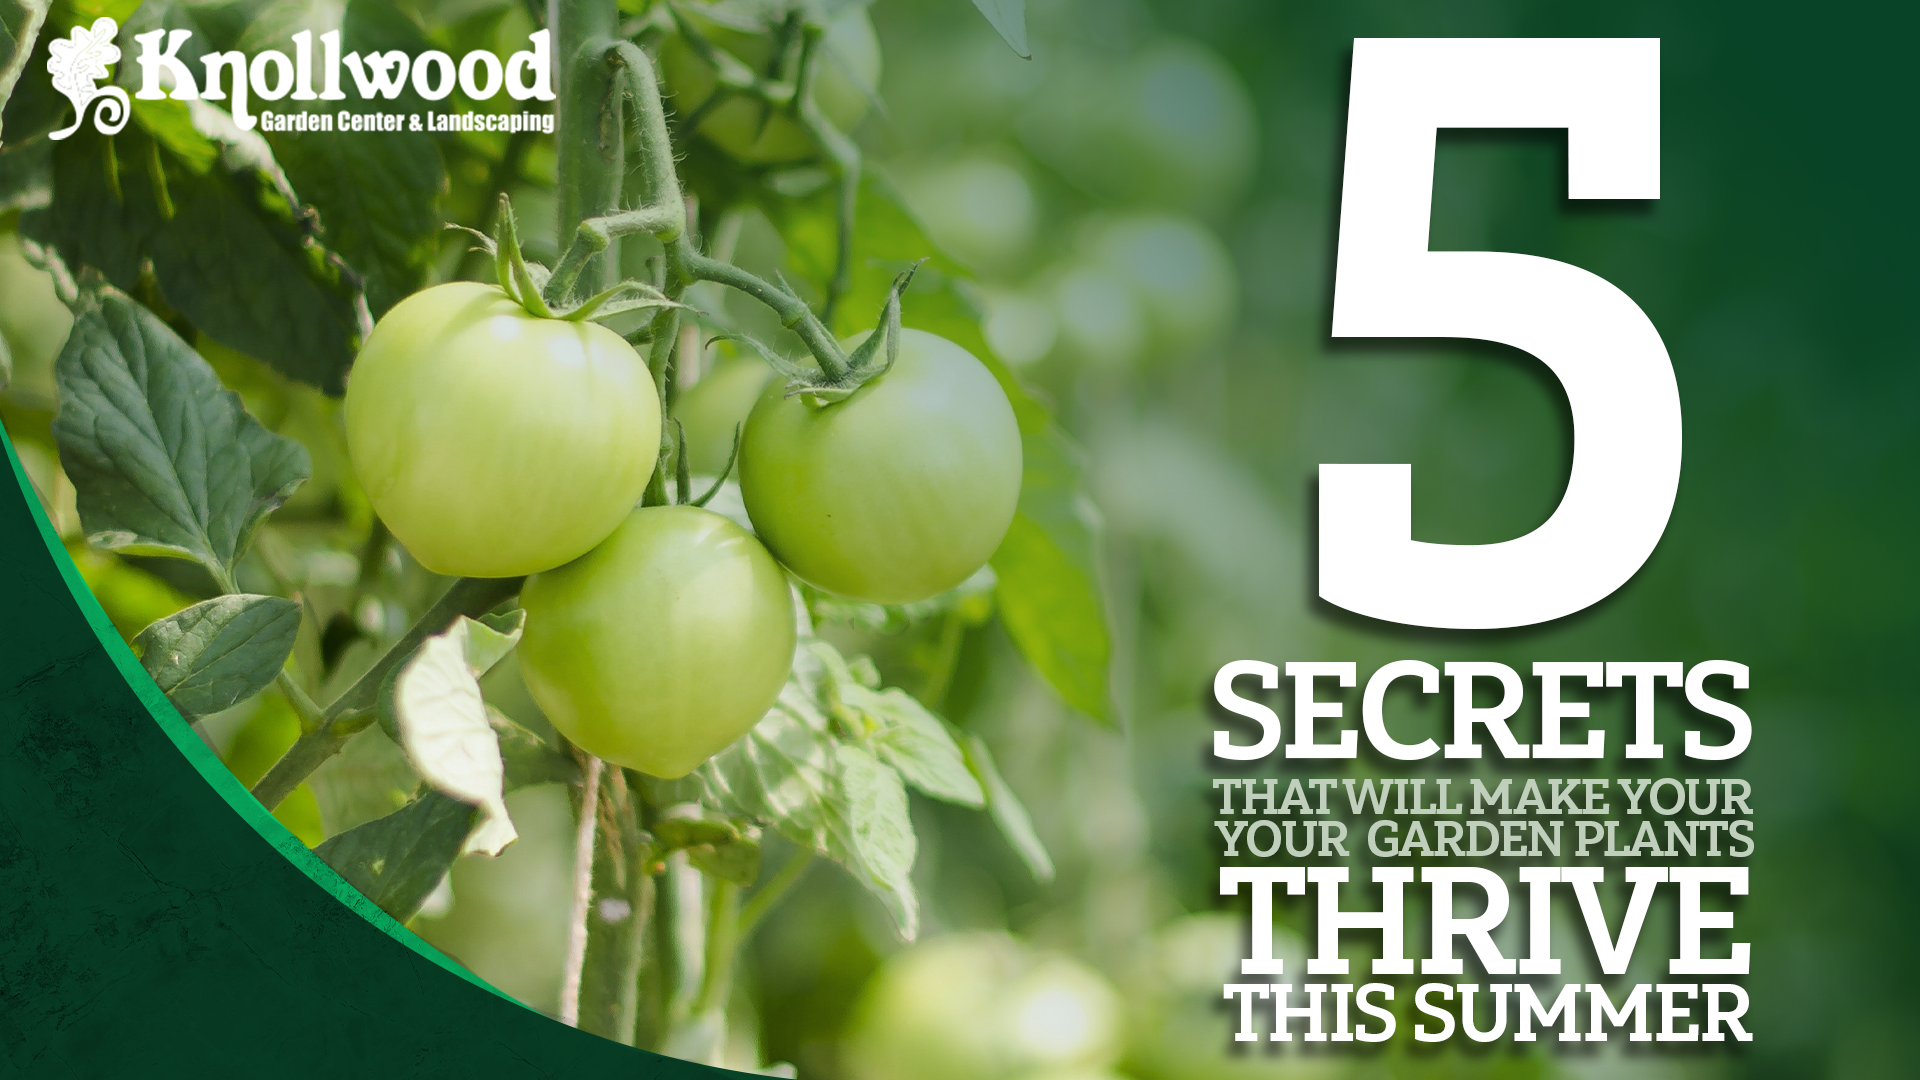 Green tomatoes hanging on a vine with the text: "5 secrets that will make our garden plants thrive this summer"